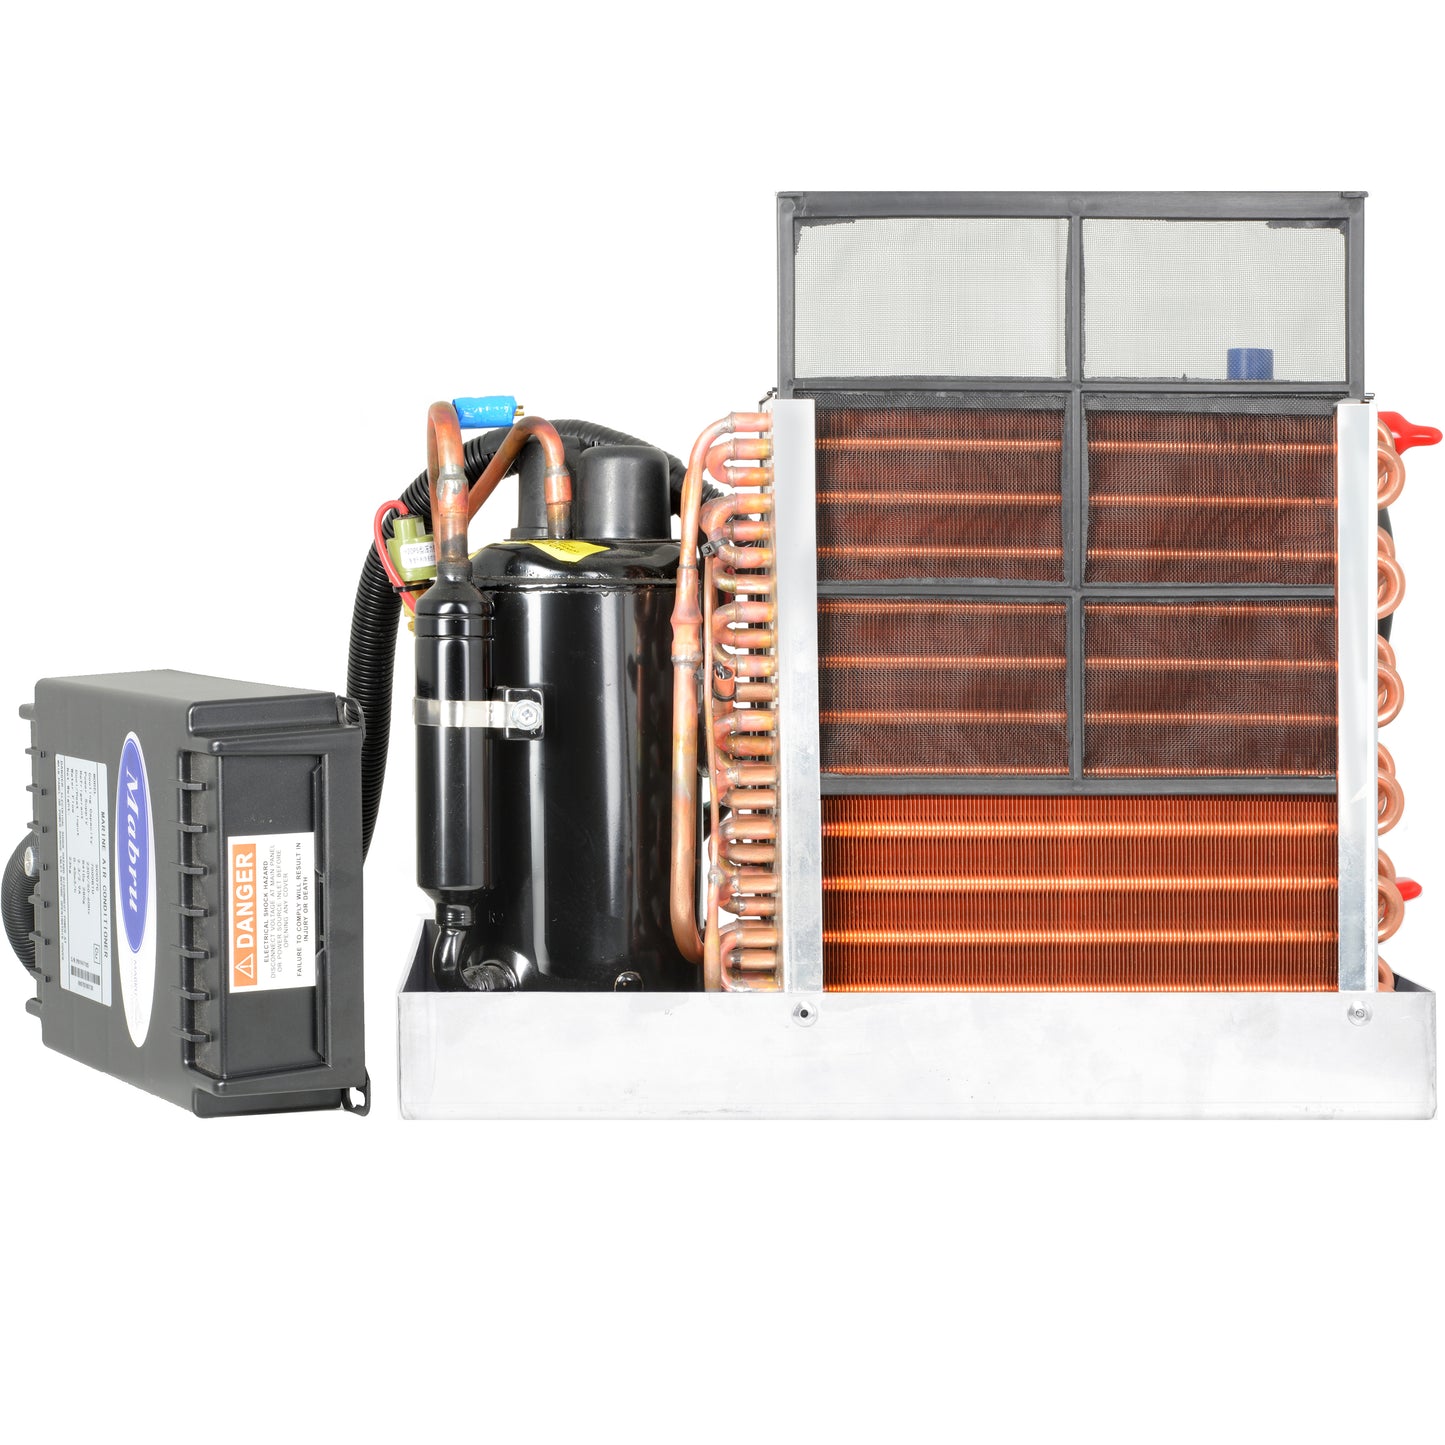 SELF-CONTAINED 7000 BTU 115V 50/60HZ MARINE AIR CONDITIONER COPPER FIN (HEATING AND COOLING) by MABRU